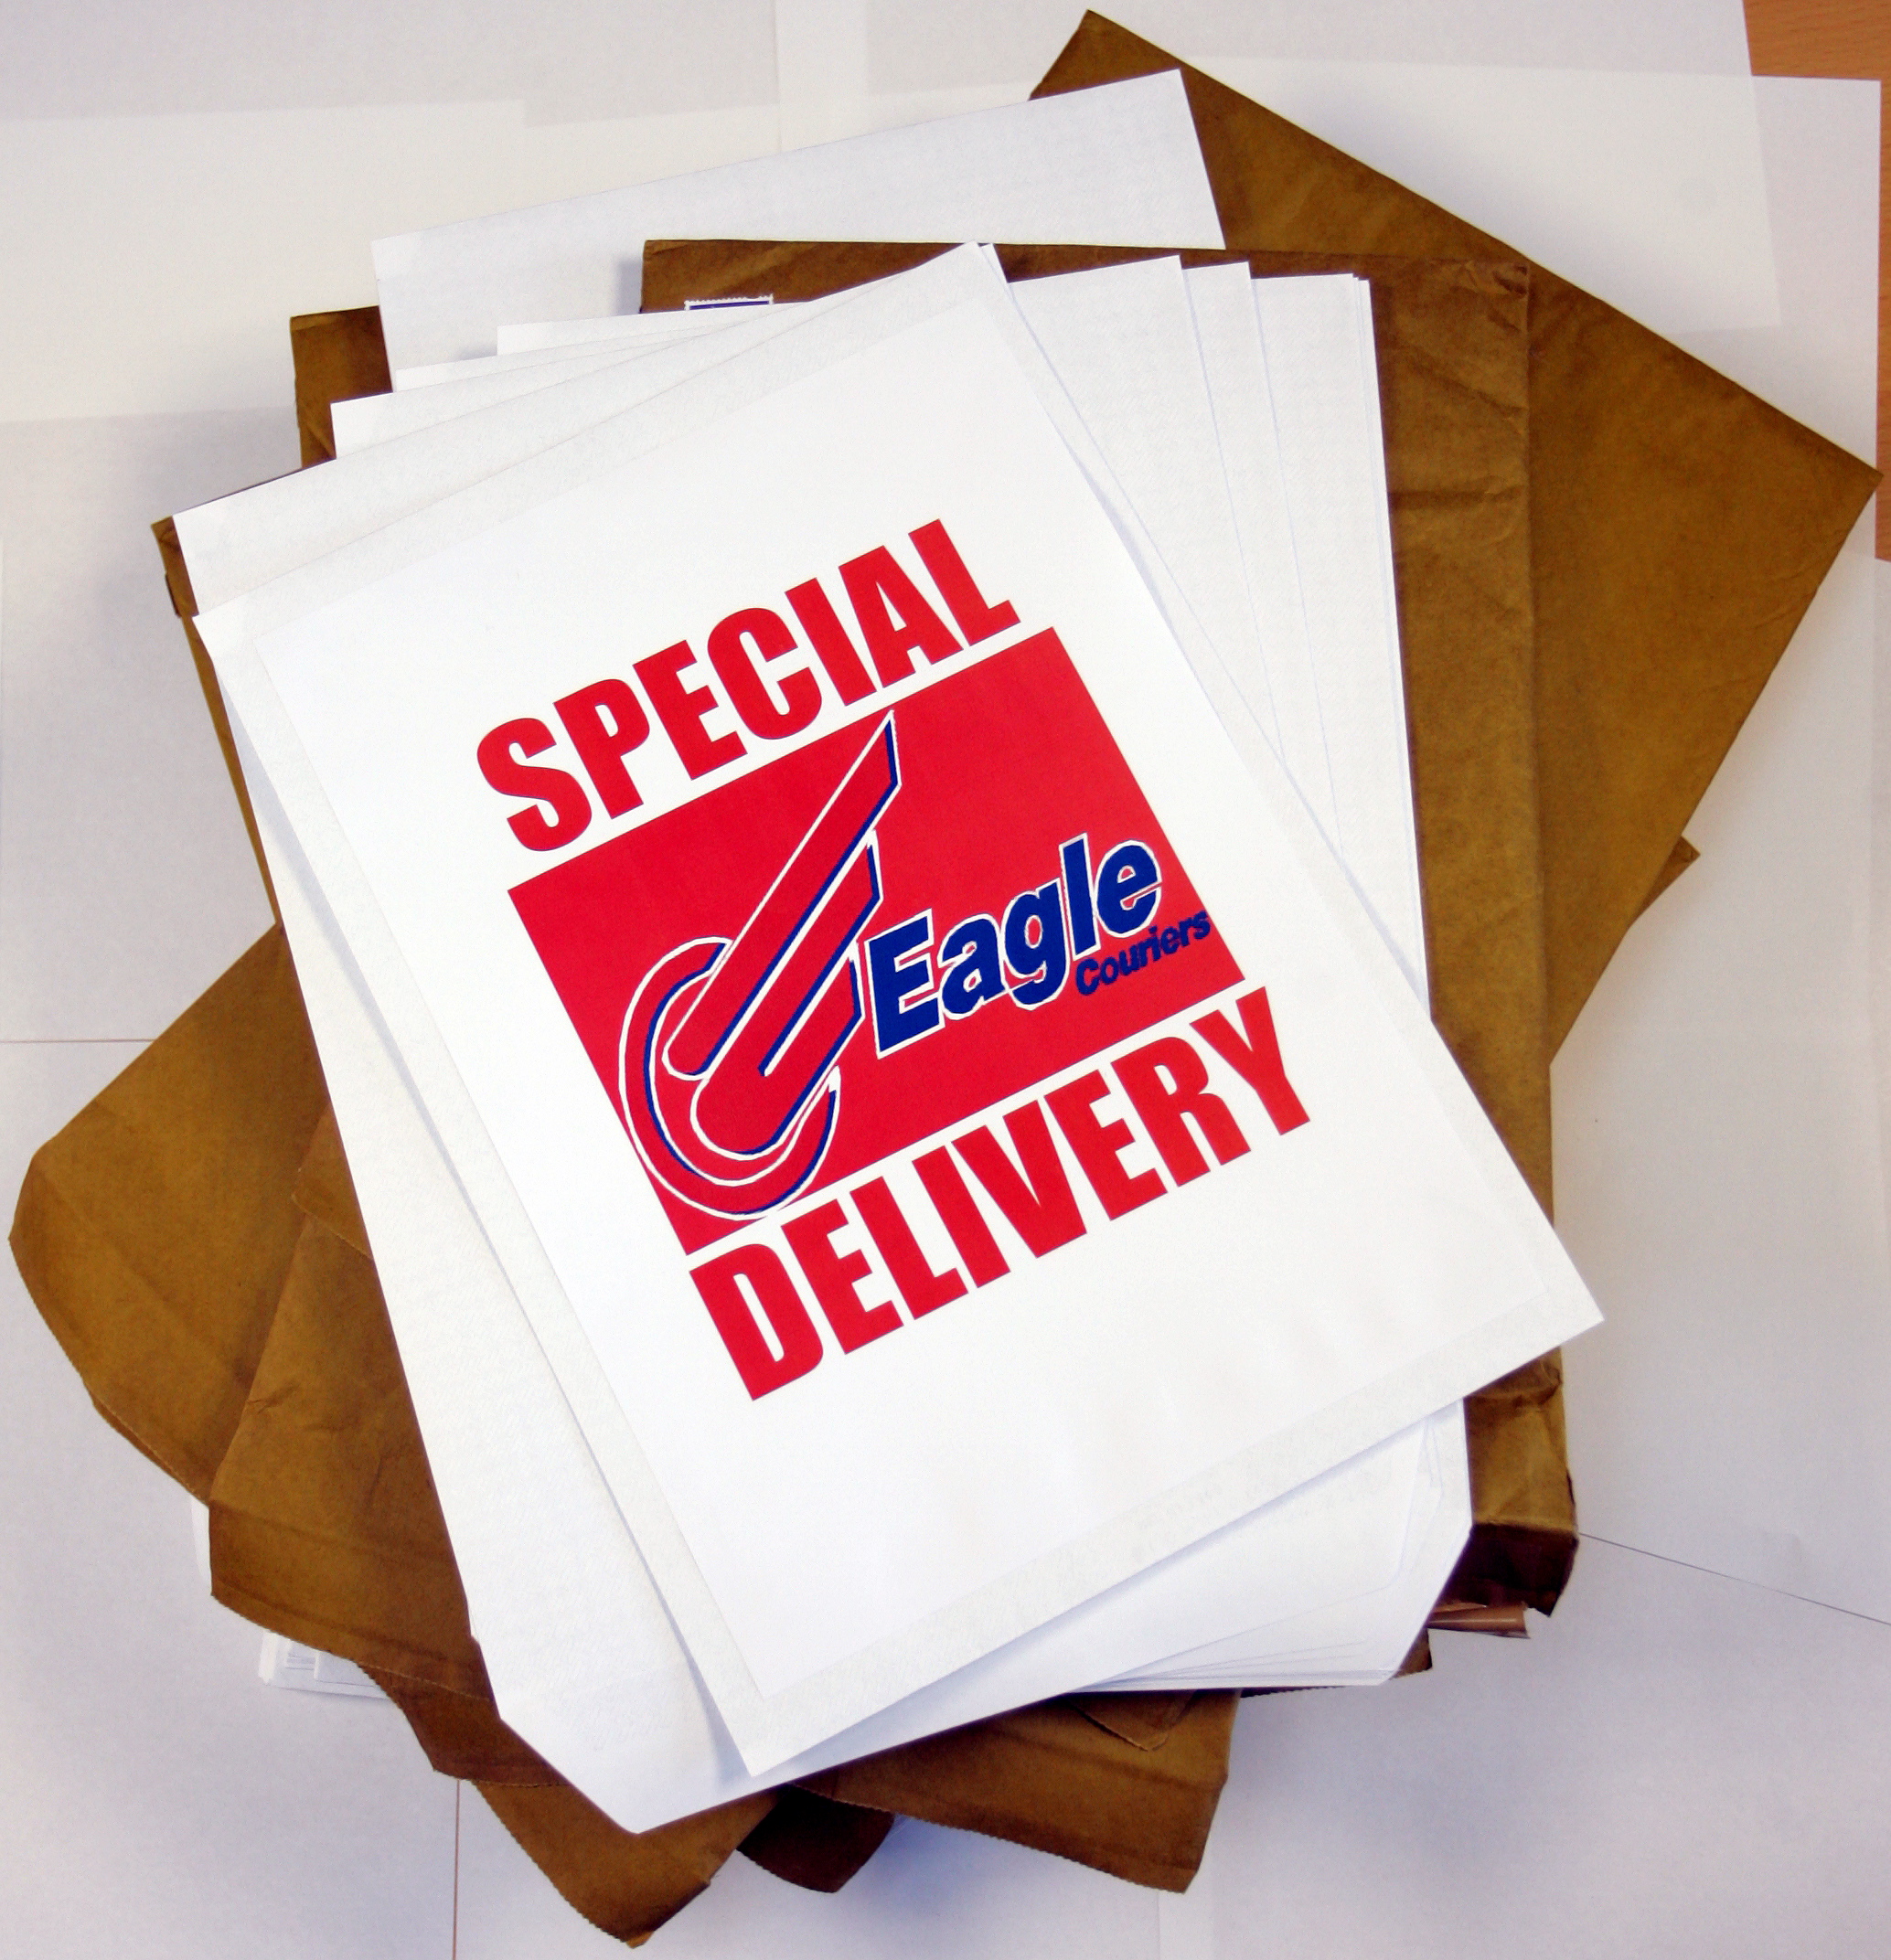 leading courier company trusted with delivering confidential packages